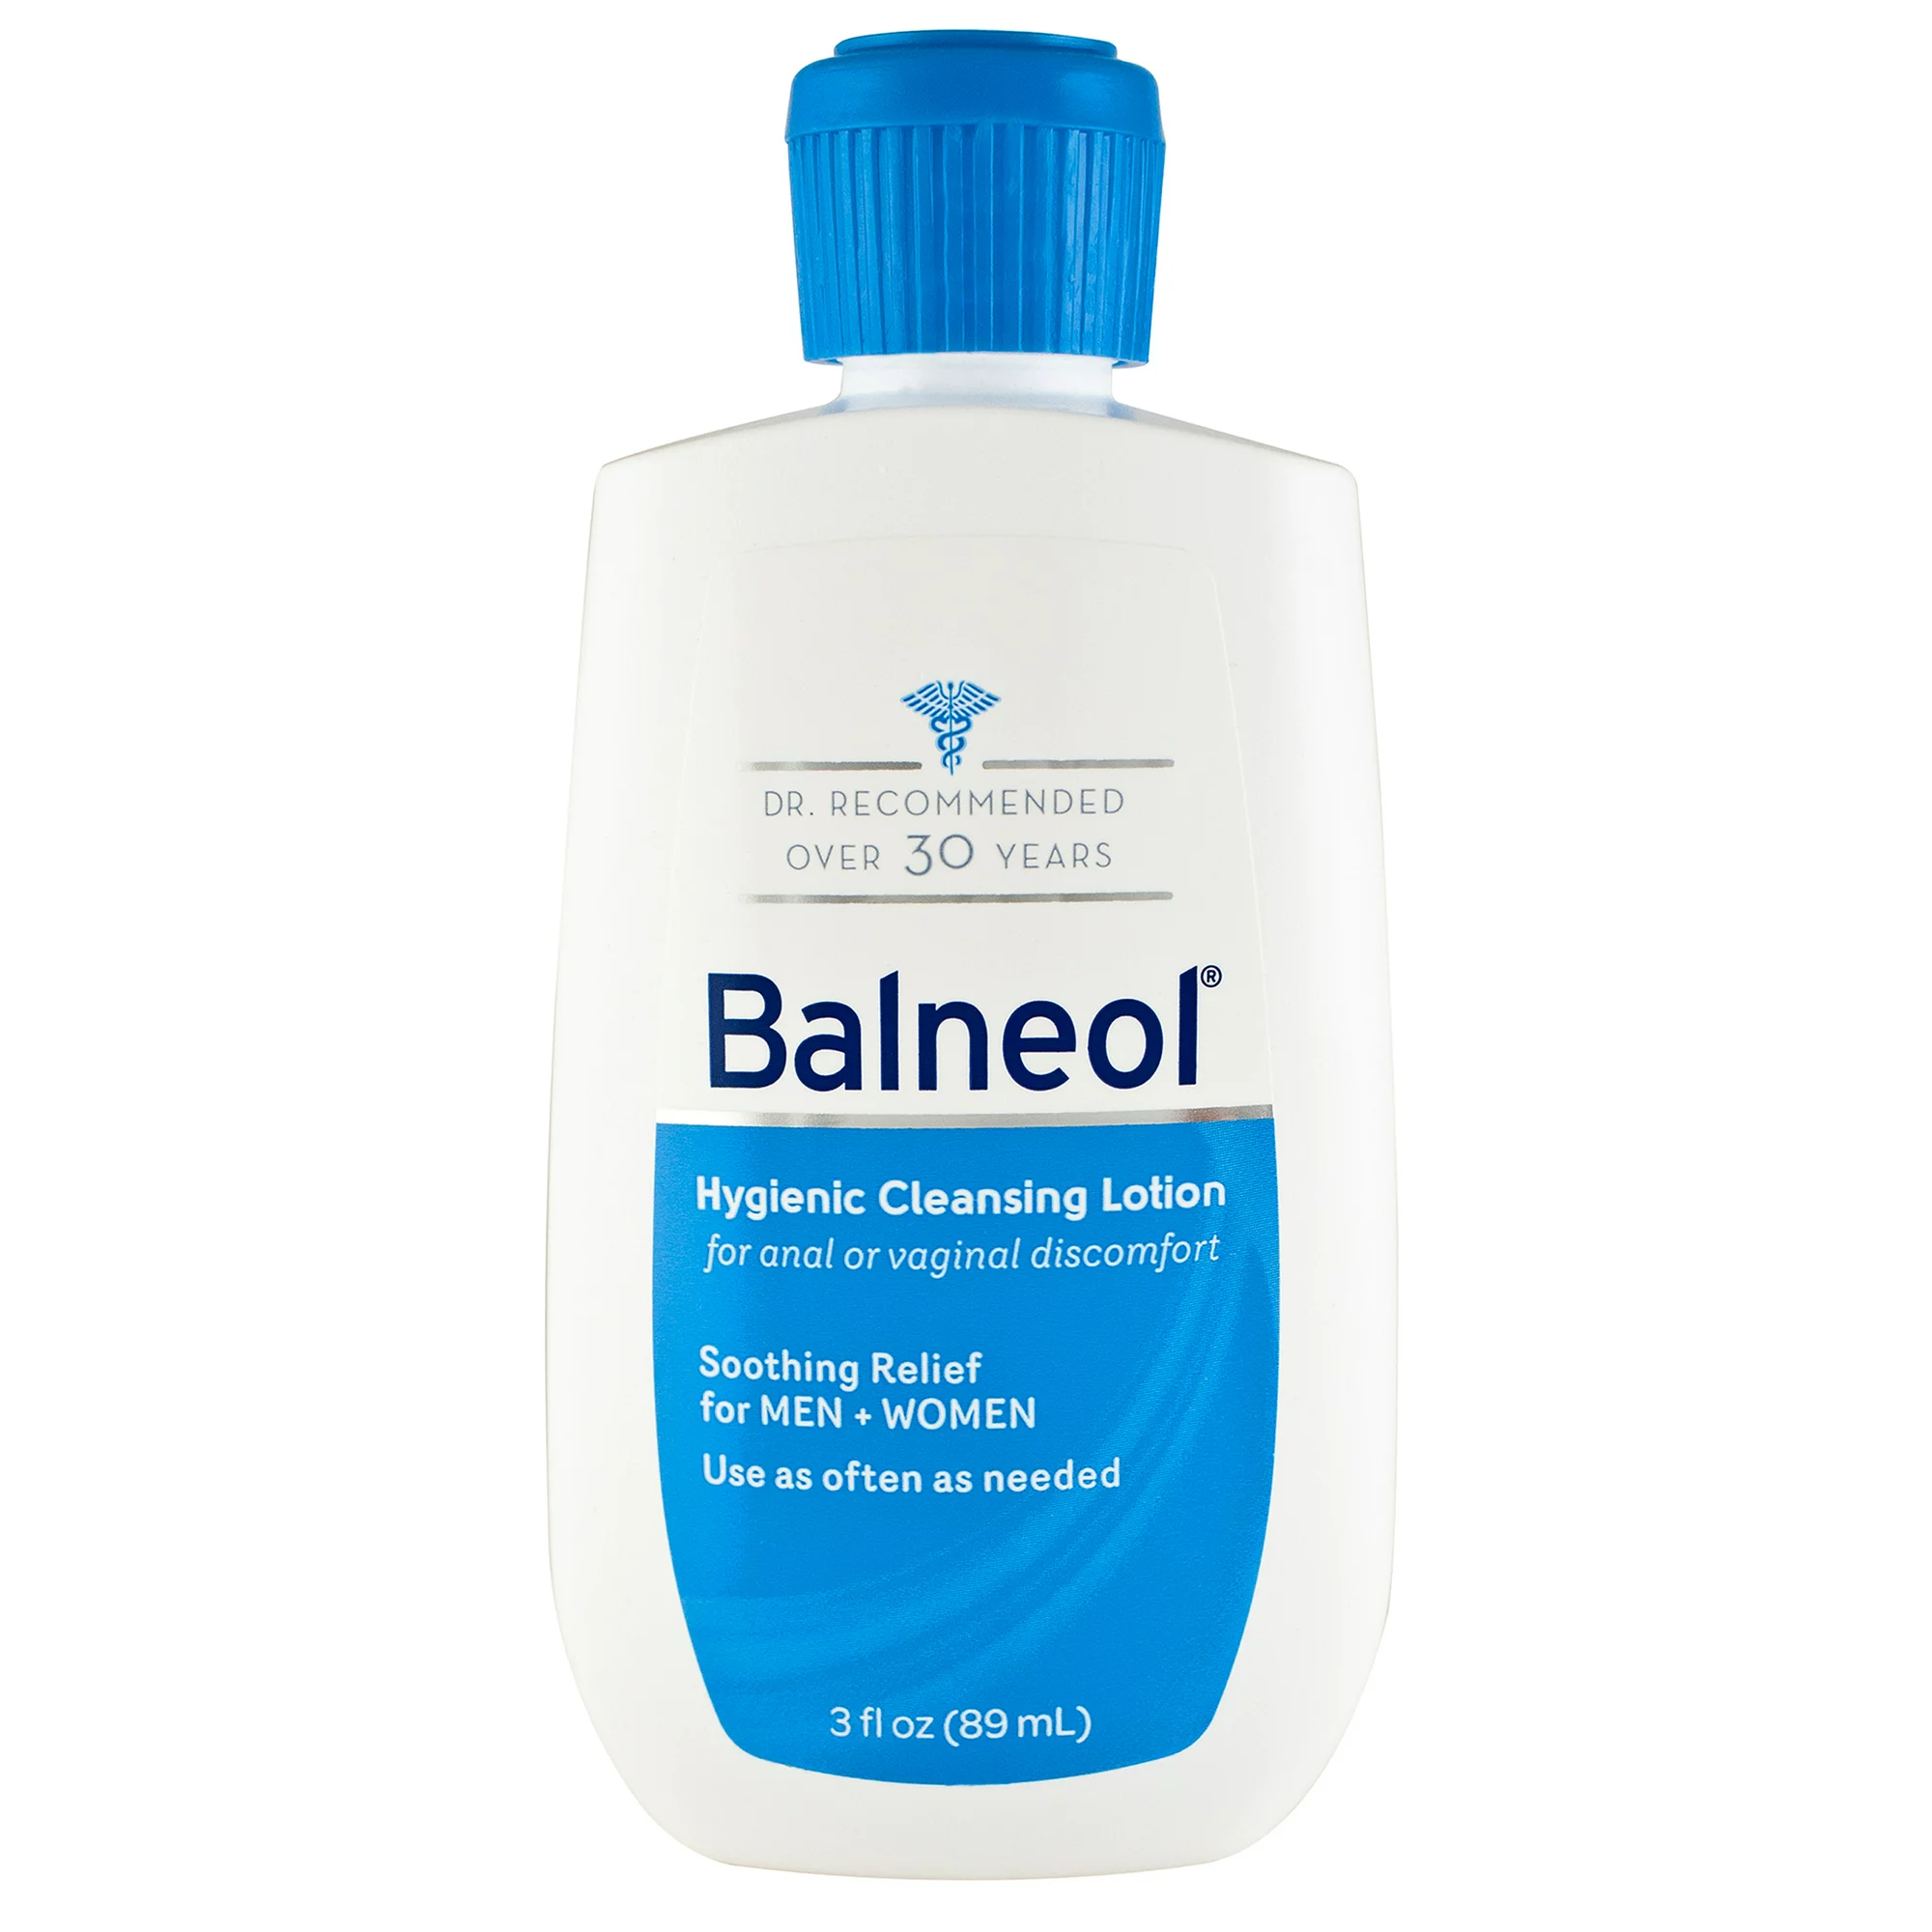 Experience soothing relief using BALNEOL Hygienic cleansing lotion.